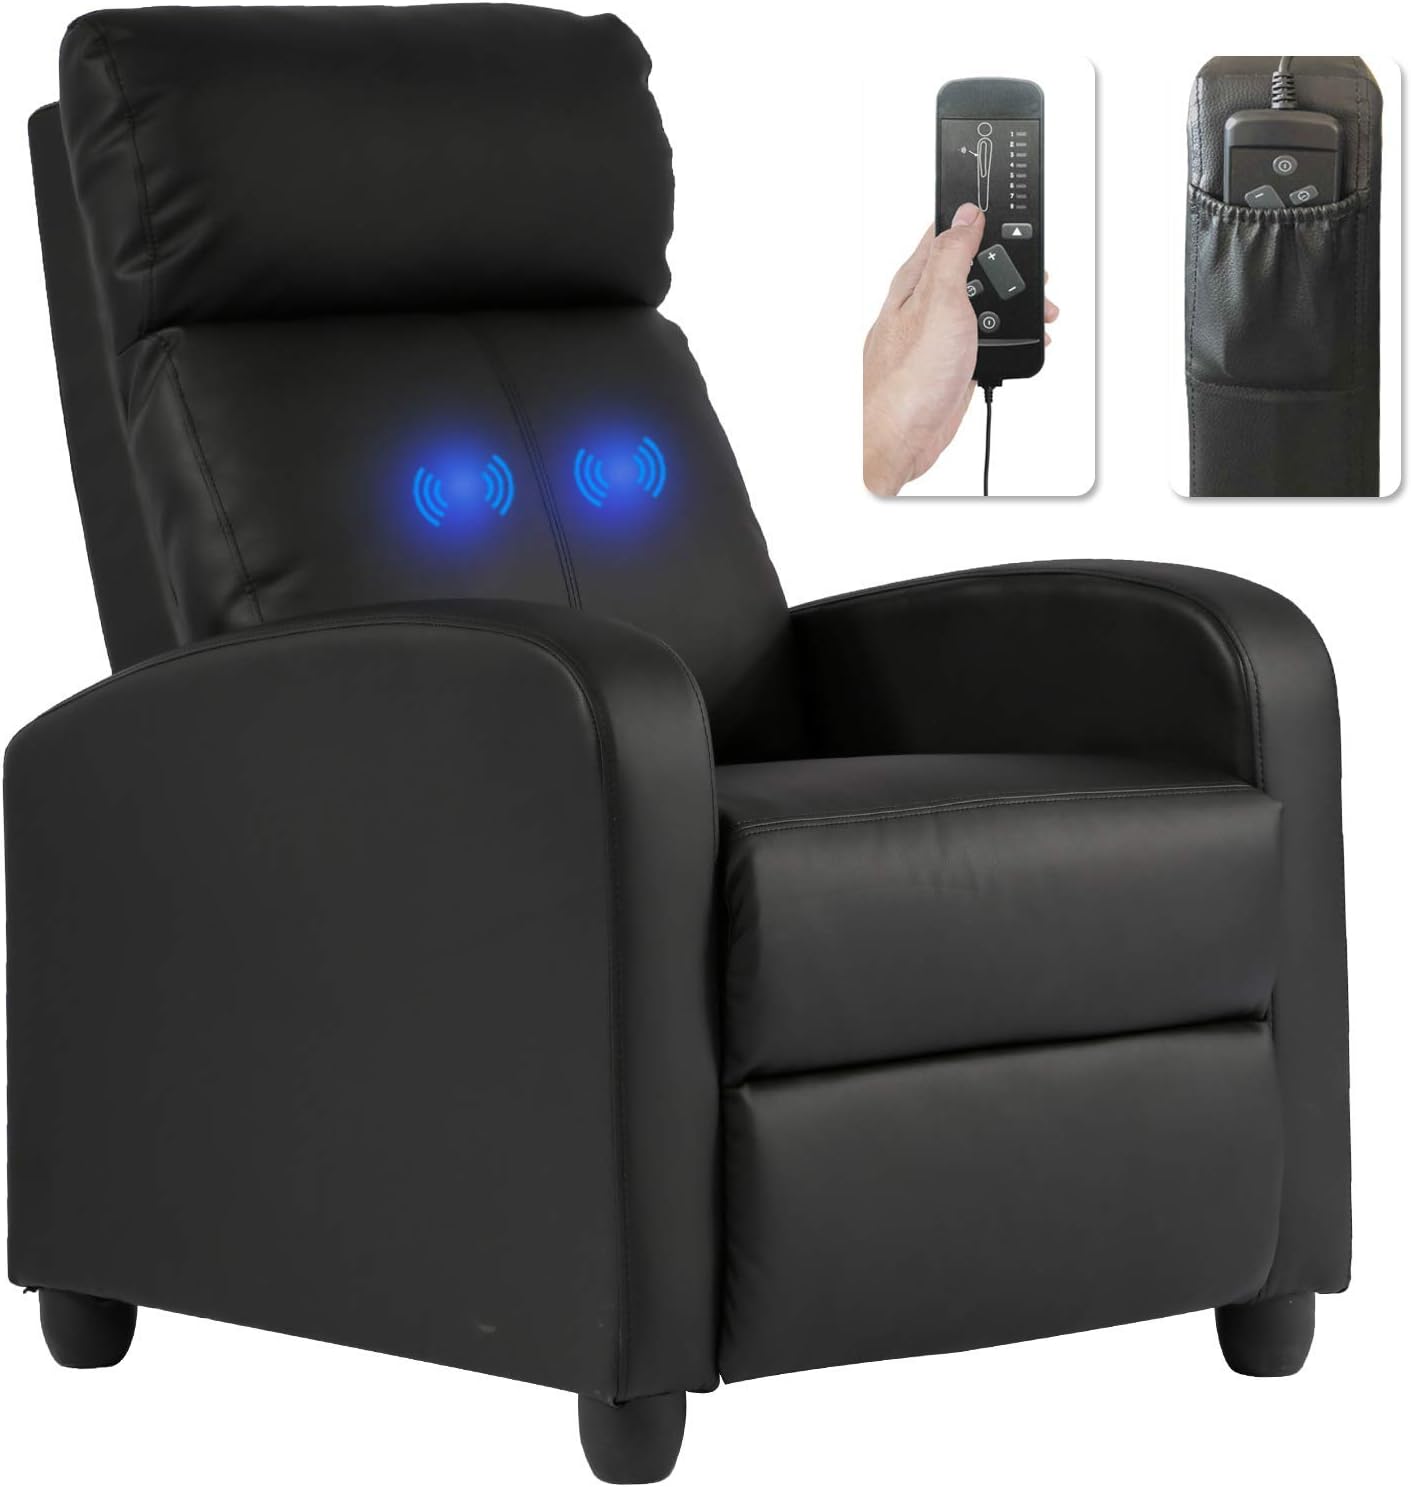 Recliner Chair for Living Room Massage Recliner Sofa [...]